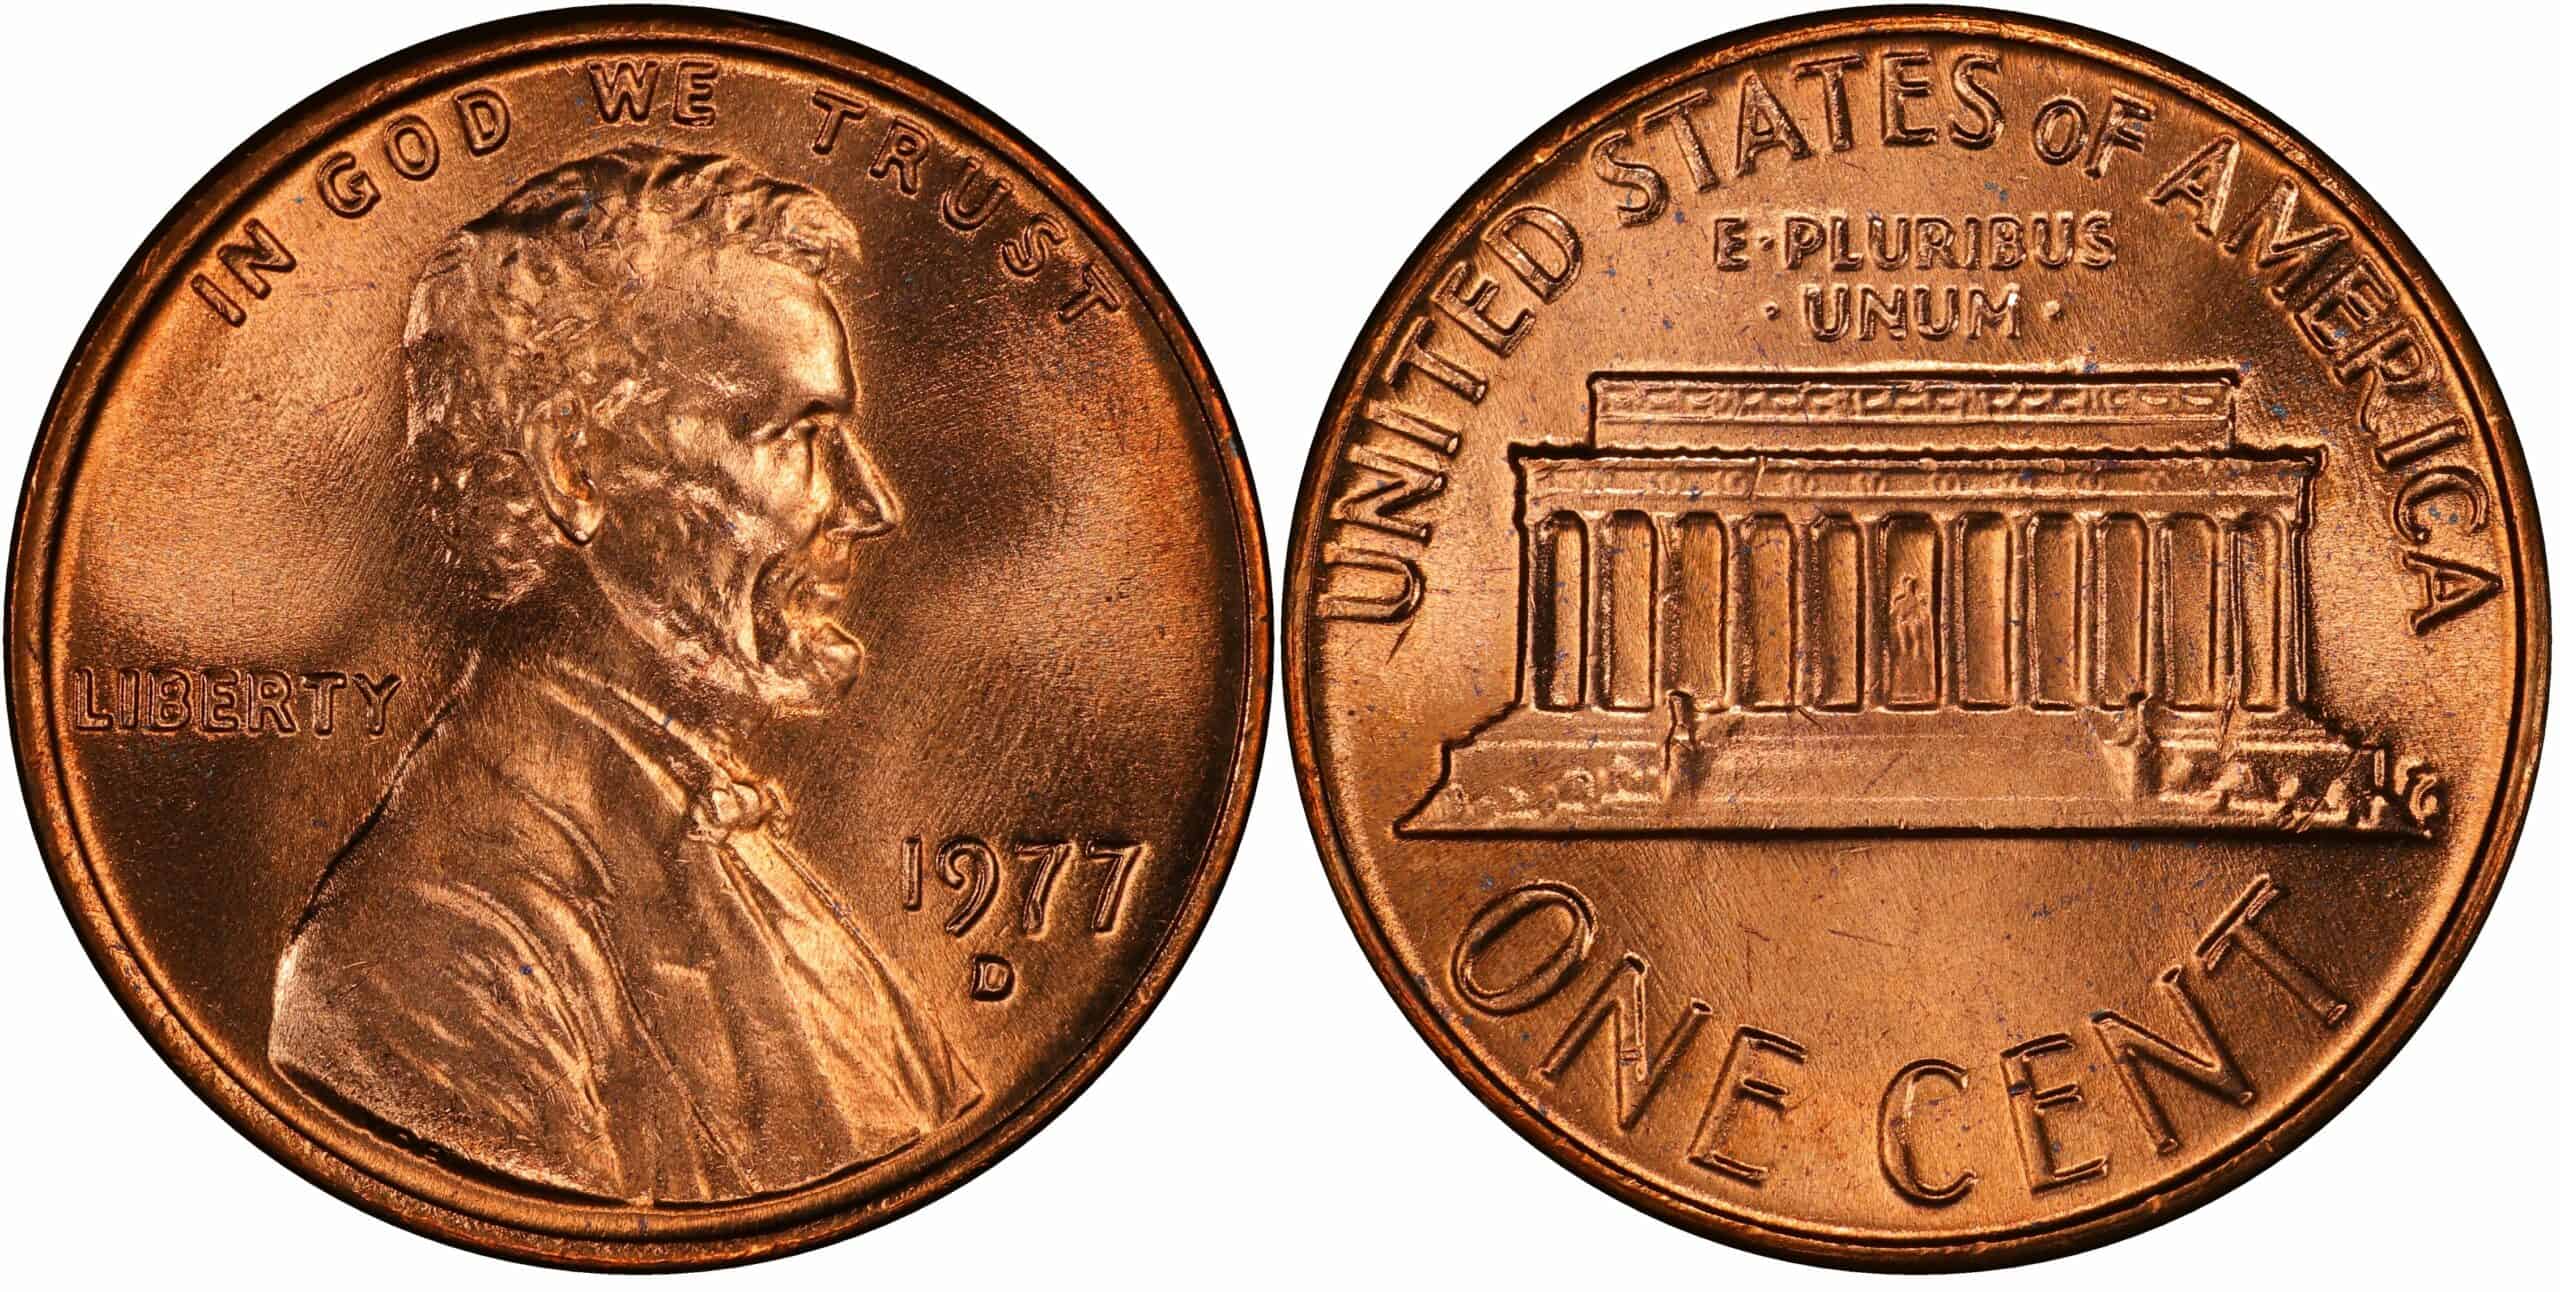 1977 D Lincoln penny